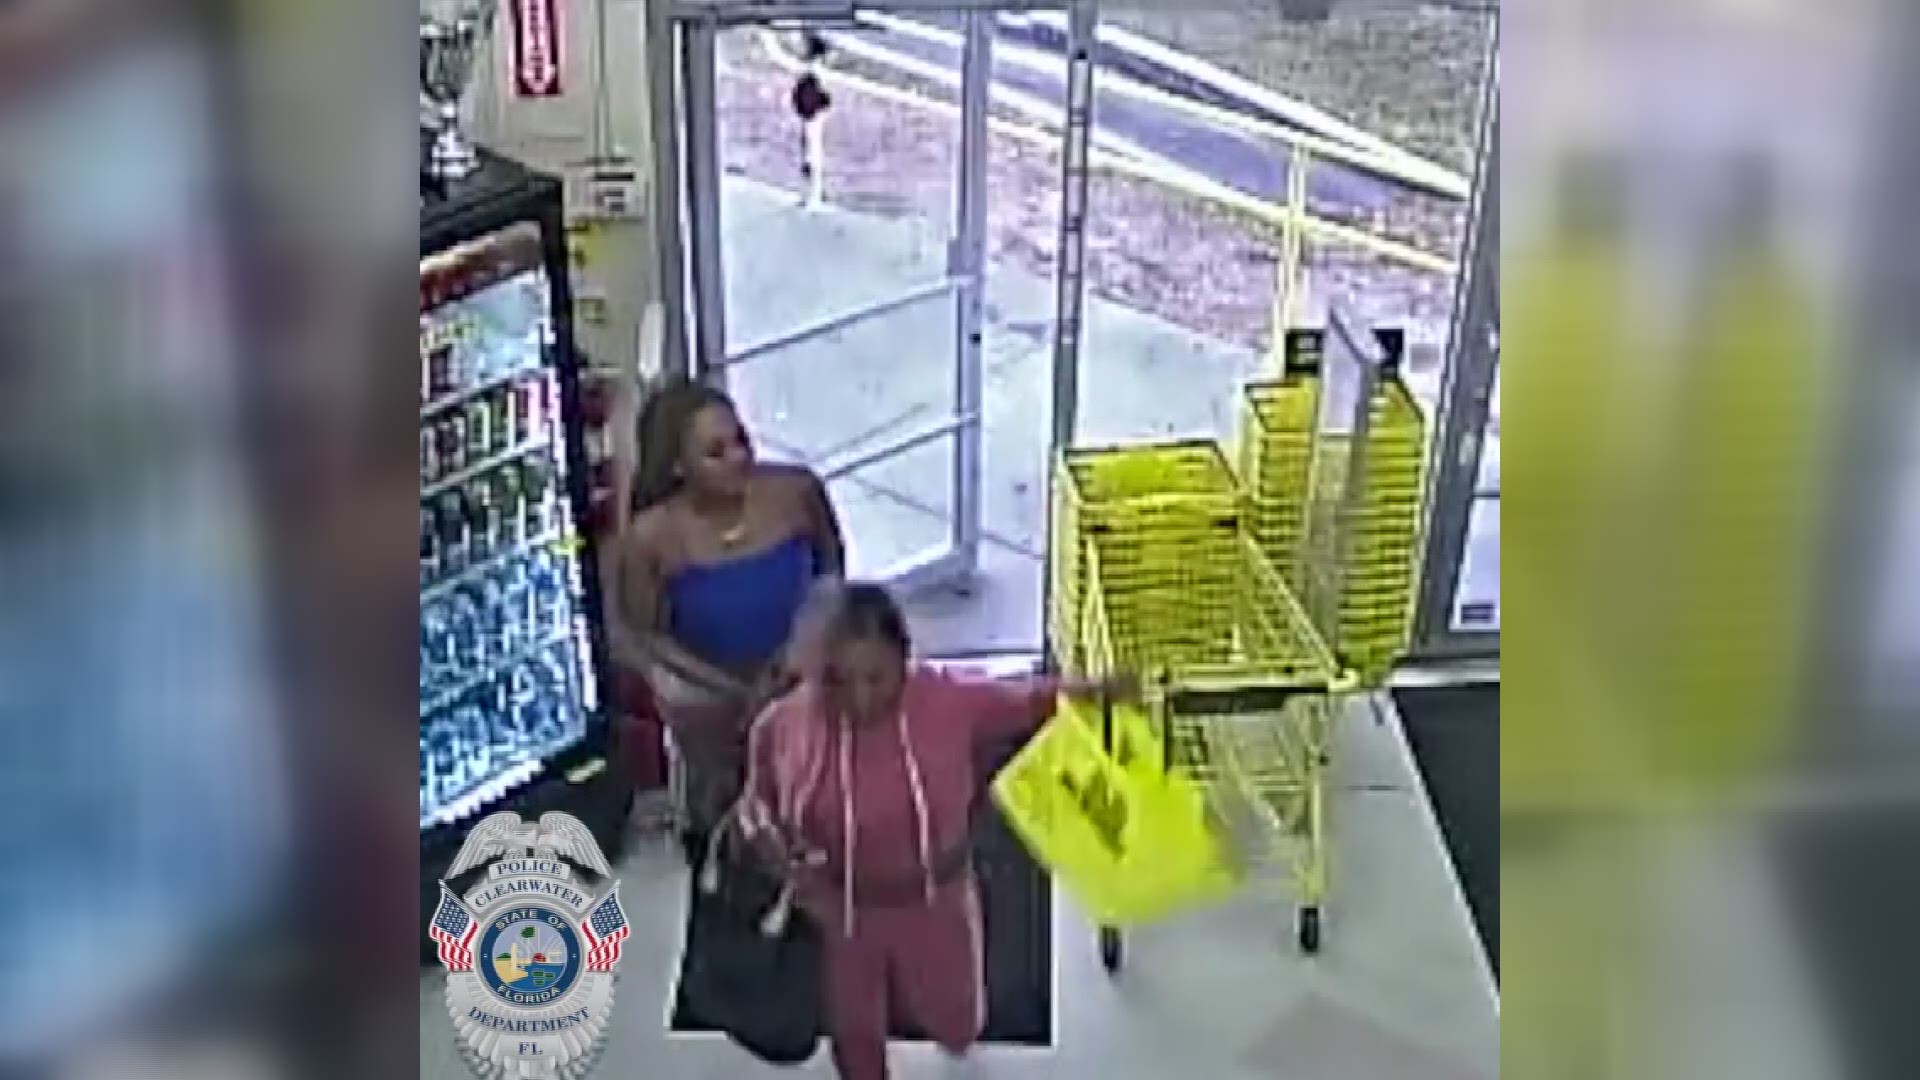 Clearwater police are trying to identify two women who they say stole from the Dollar General store at 1600 N. Myrtle Avenue.